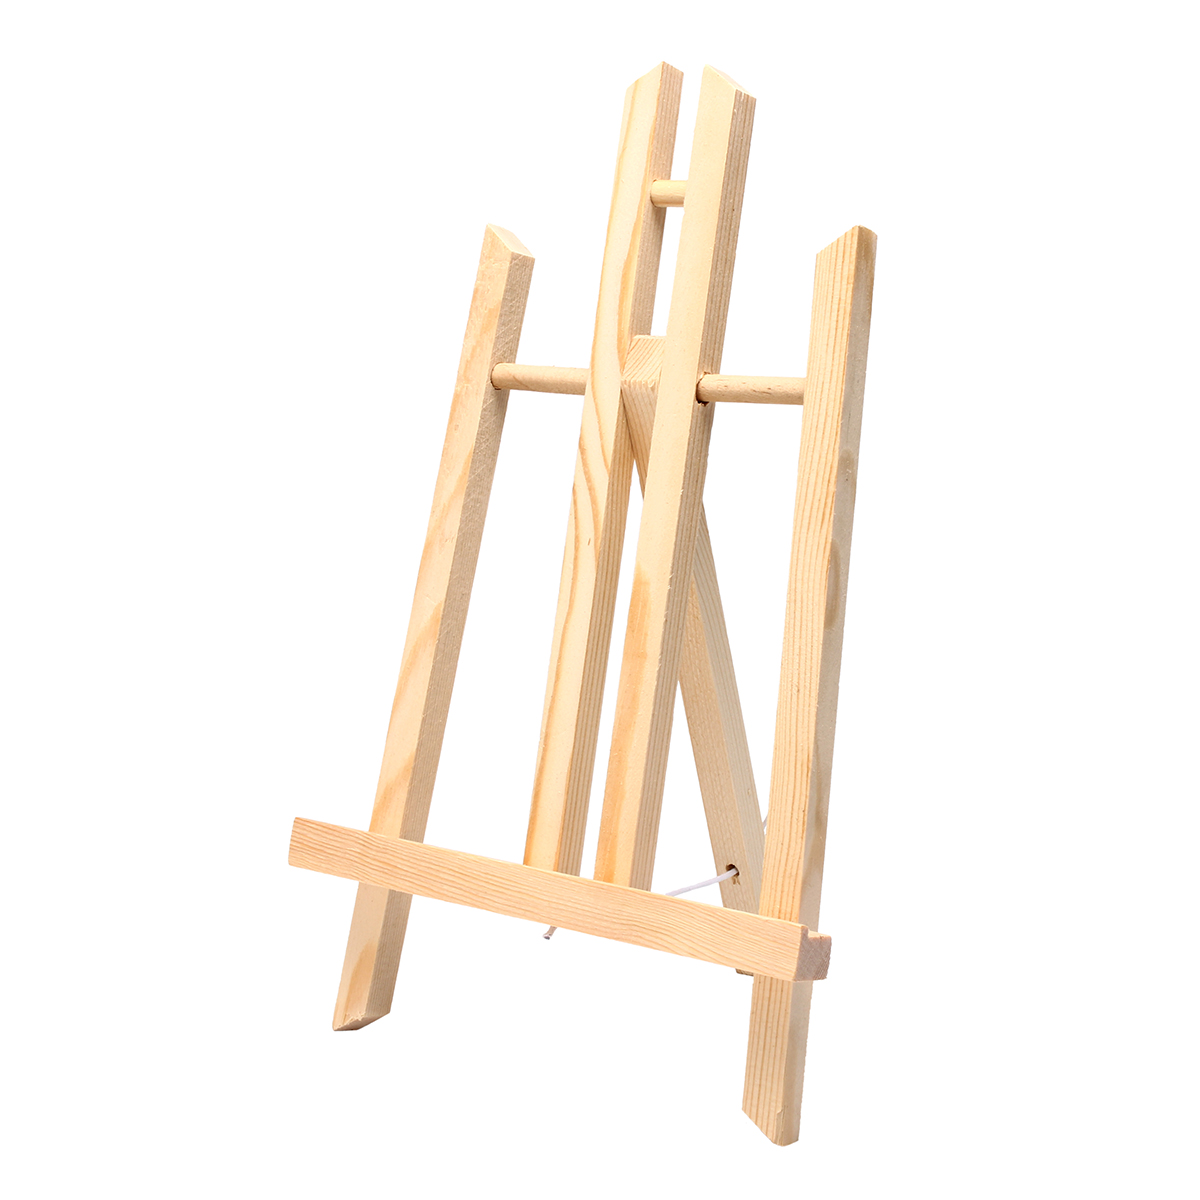 Durable-Wood-Wooden-Easels-Display-Tripod-Art-Artist-Painting-Stand-Paint-Rack-1368883-5